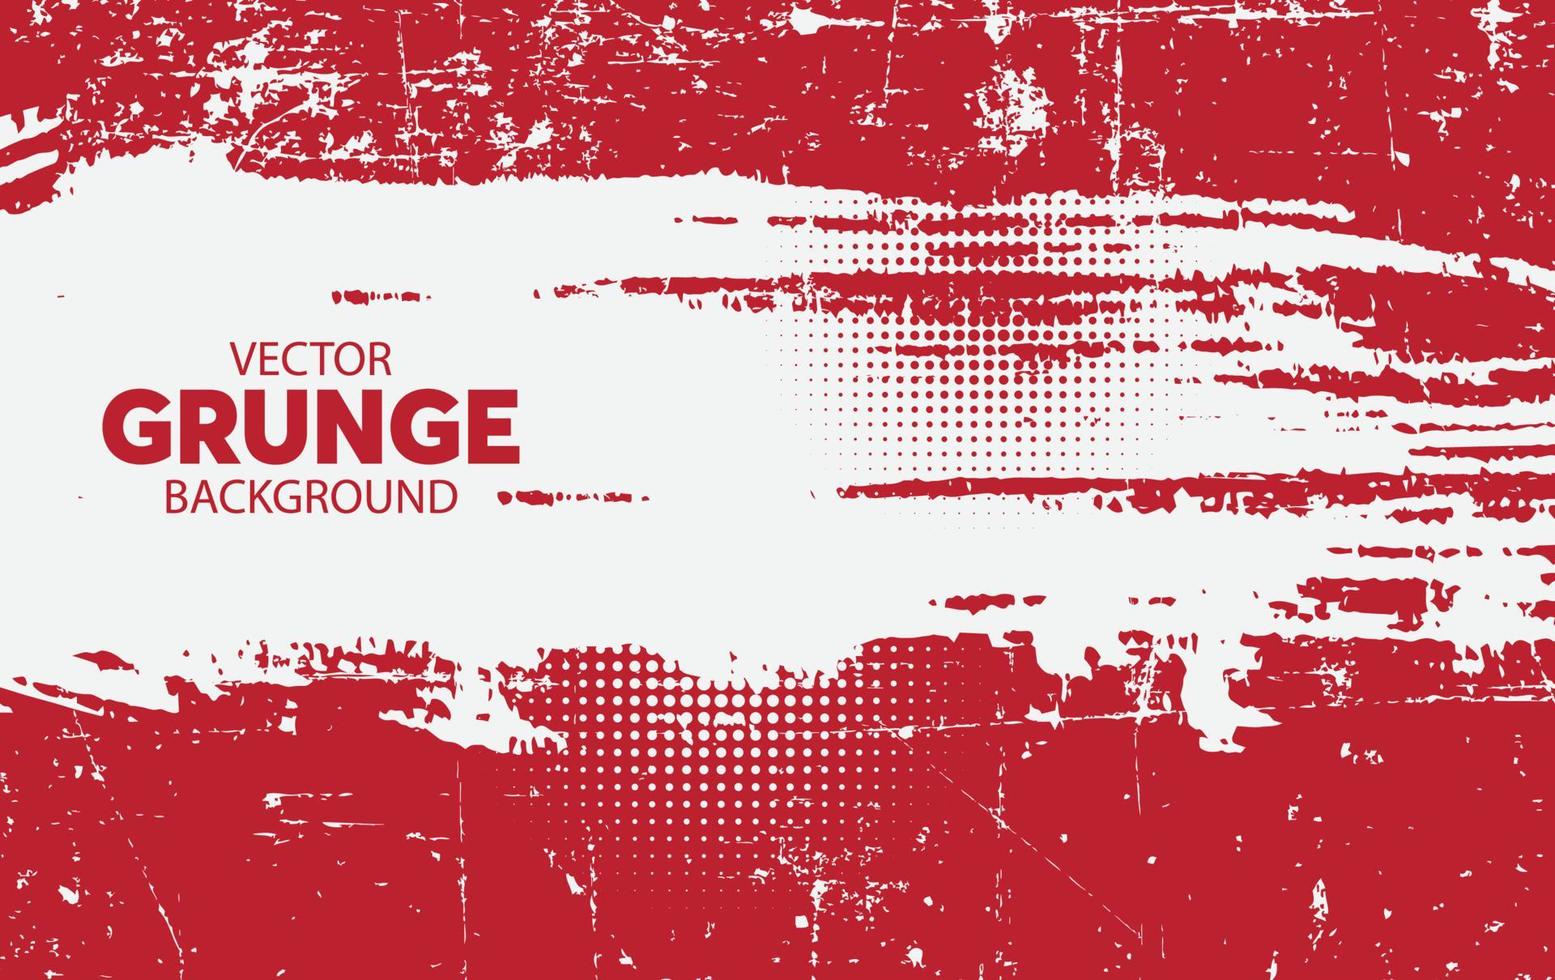 Dirty Grunge Vector Background